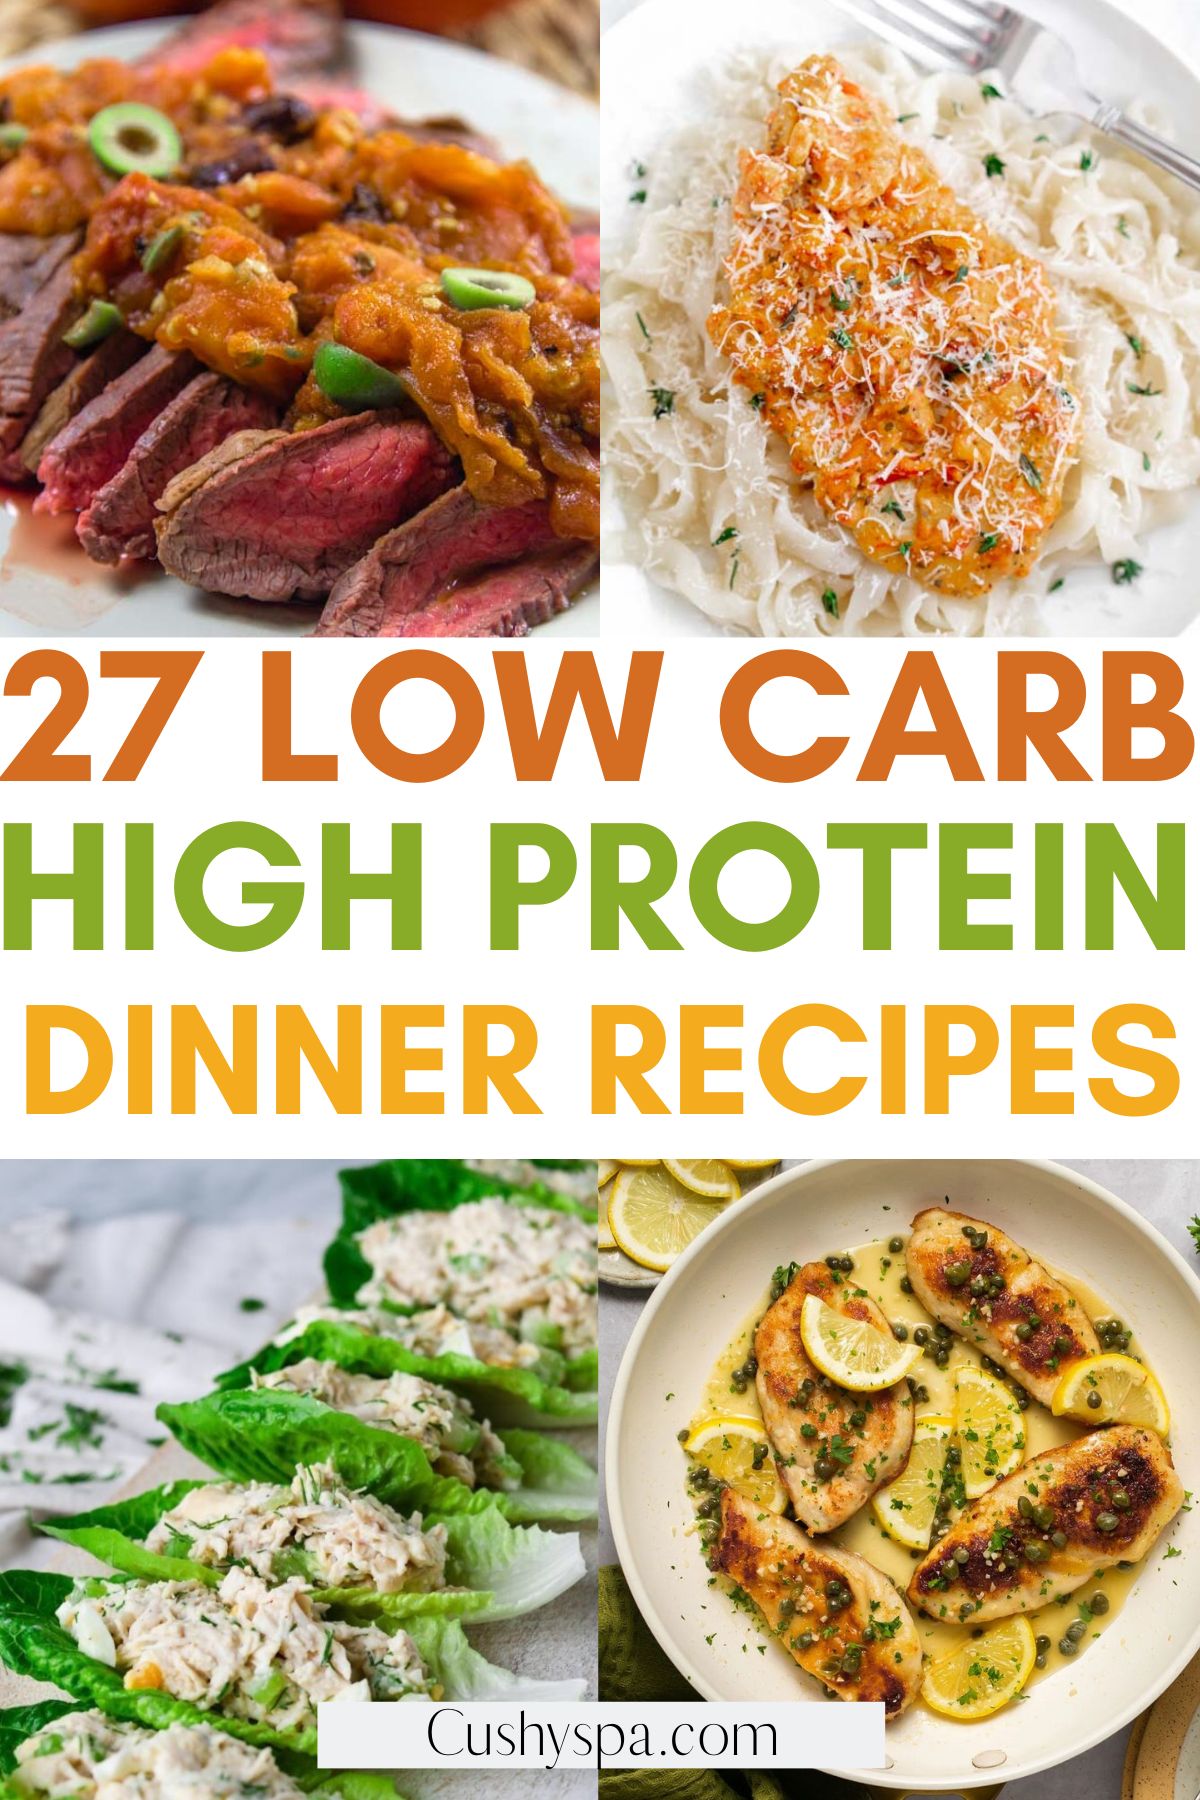 Low Carb High Protein Dinner Recipes